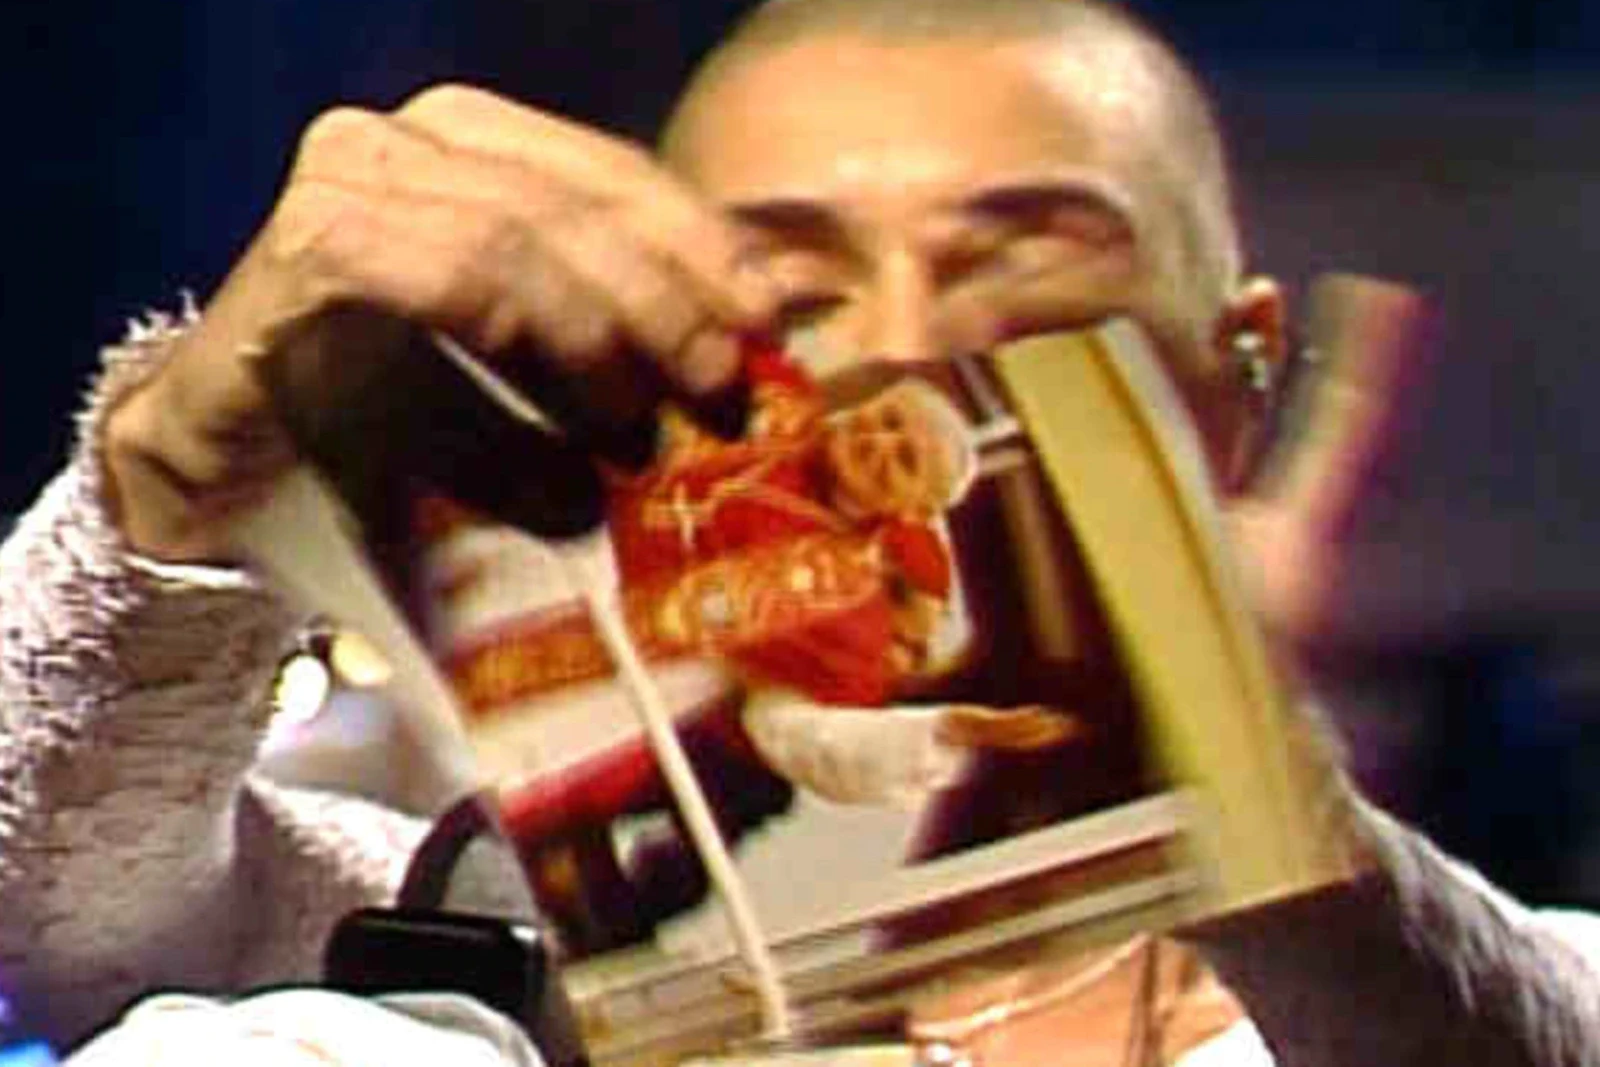 30 Years Ago: Sinead O'Connor Tears Picture of the Pope on 'SNL'